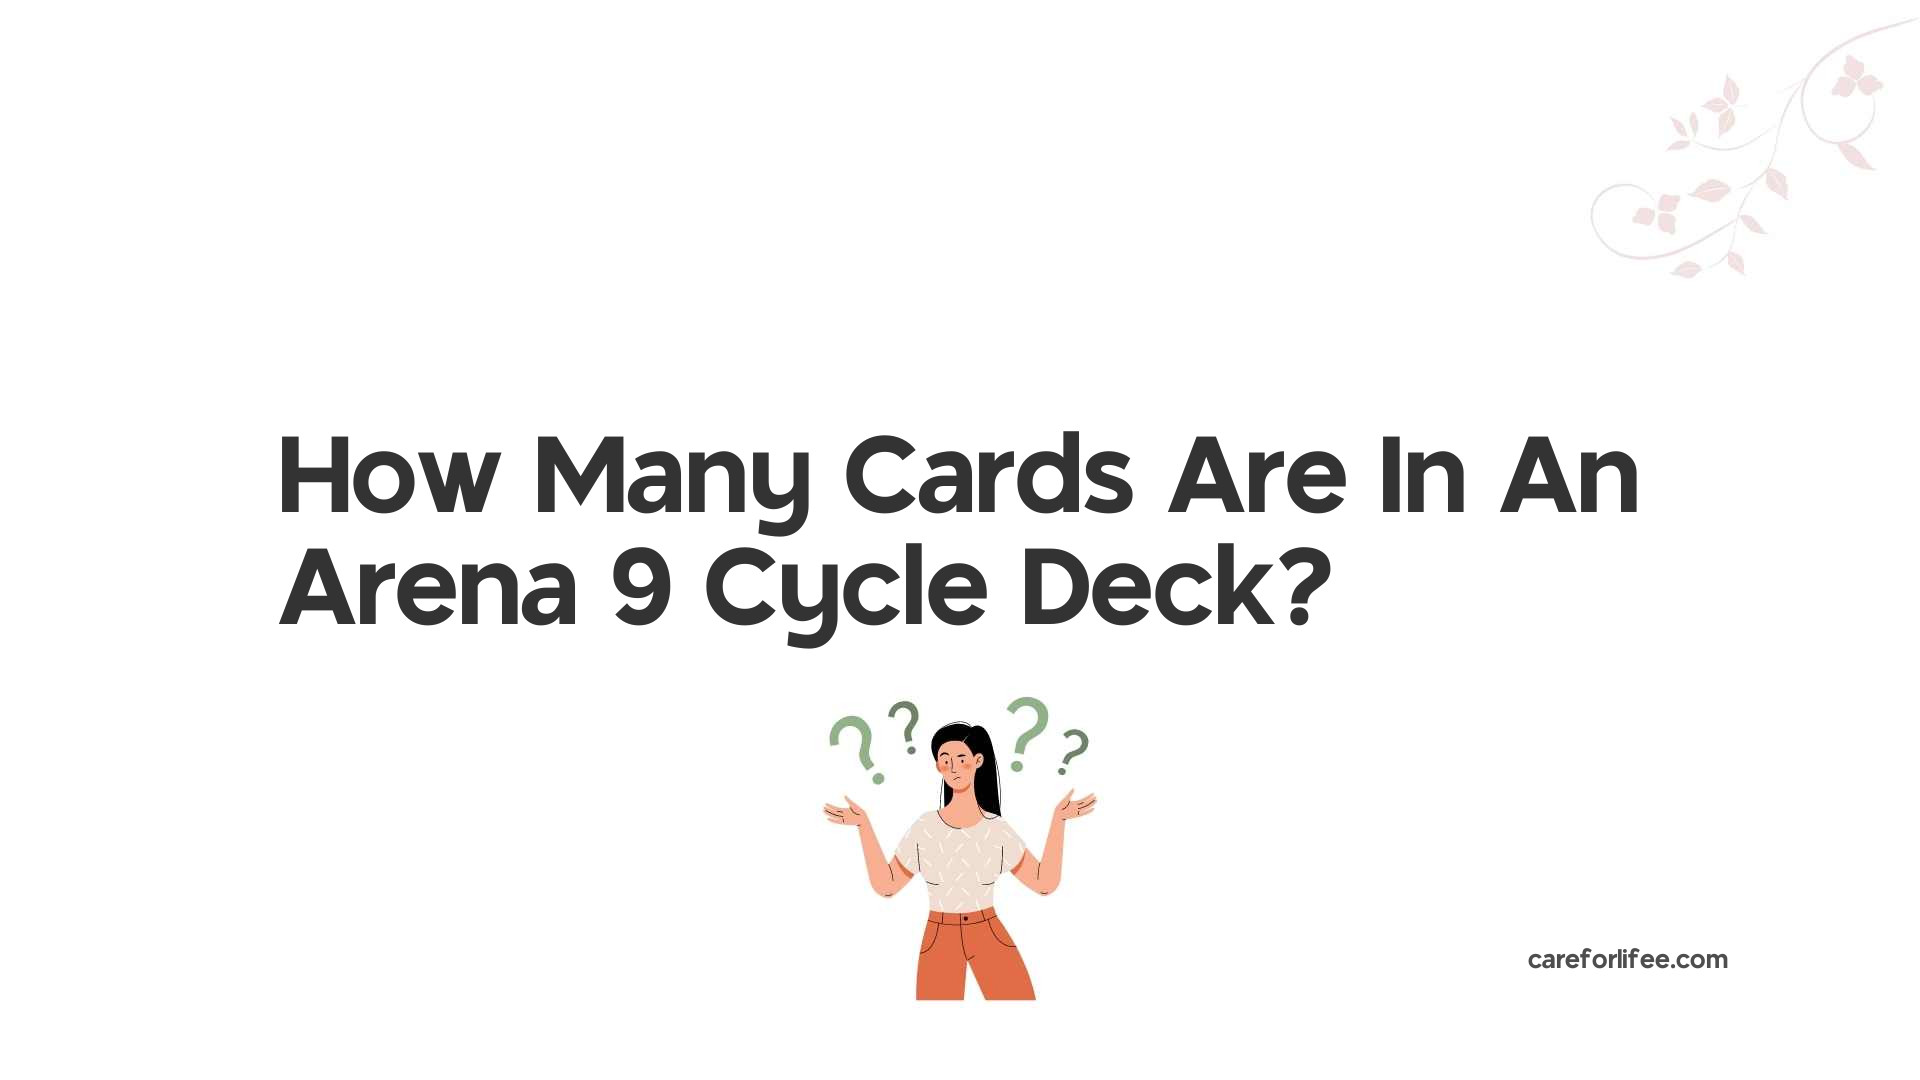 How Many Cards Are In An Arena 9 Cycle Deck?